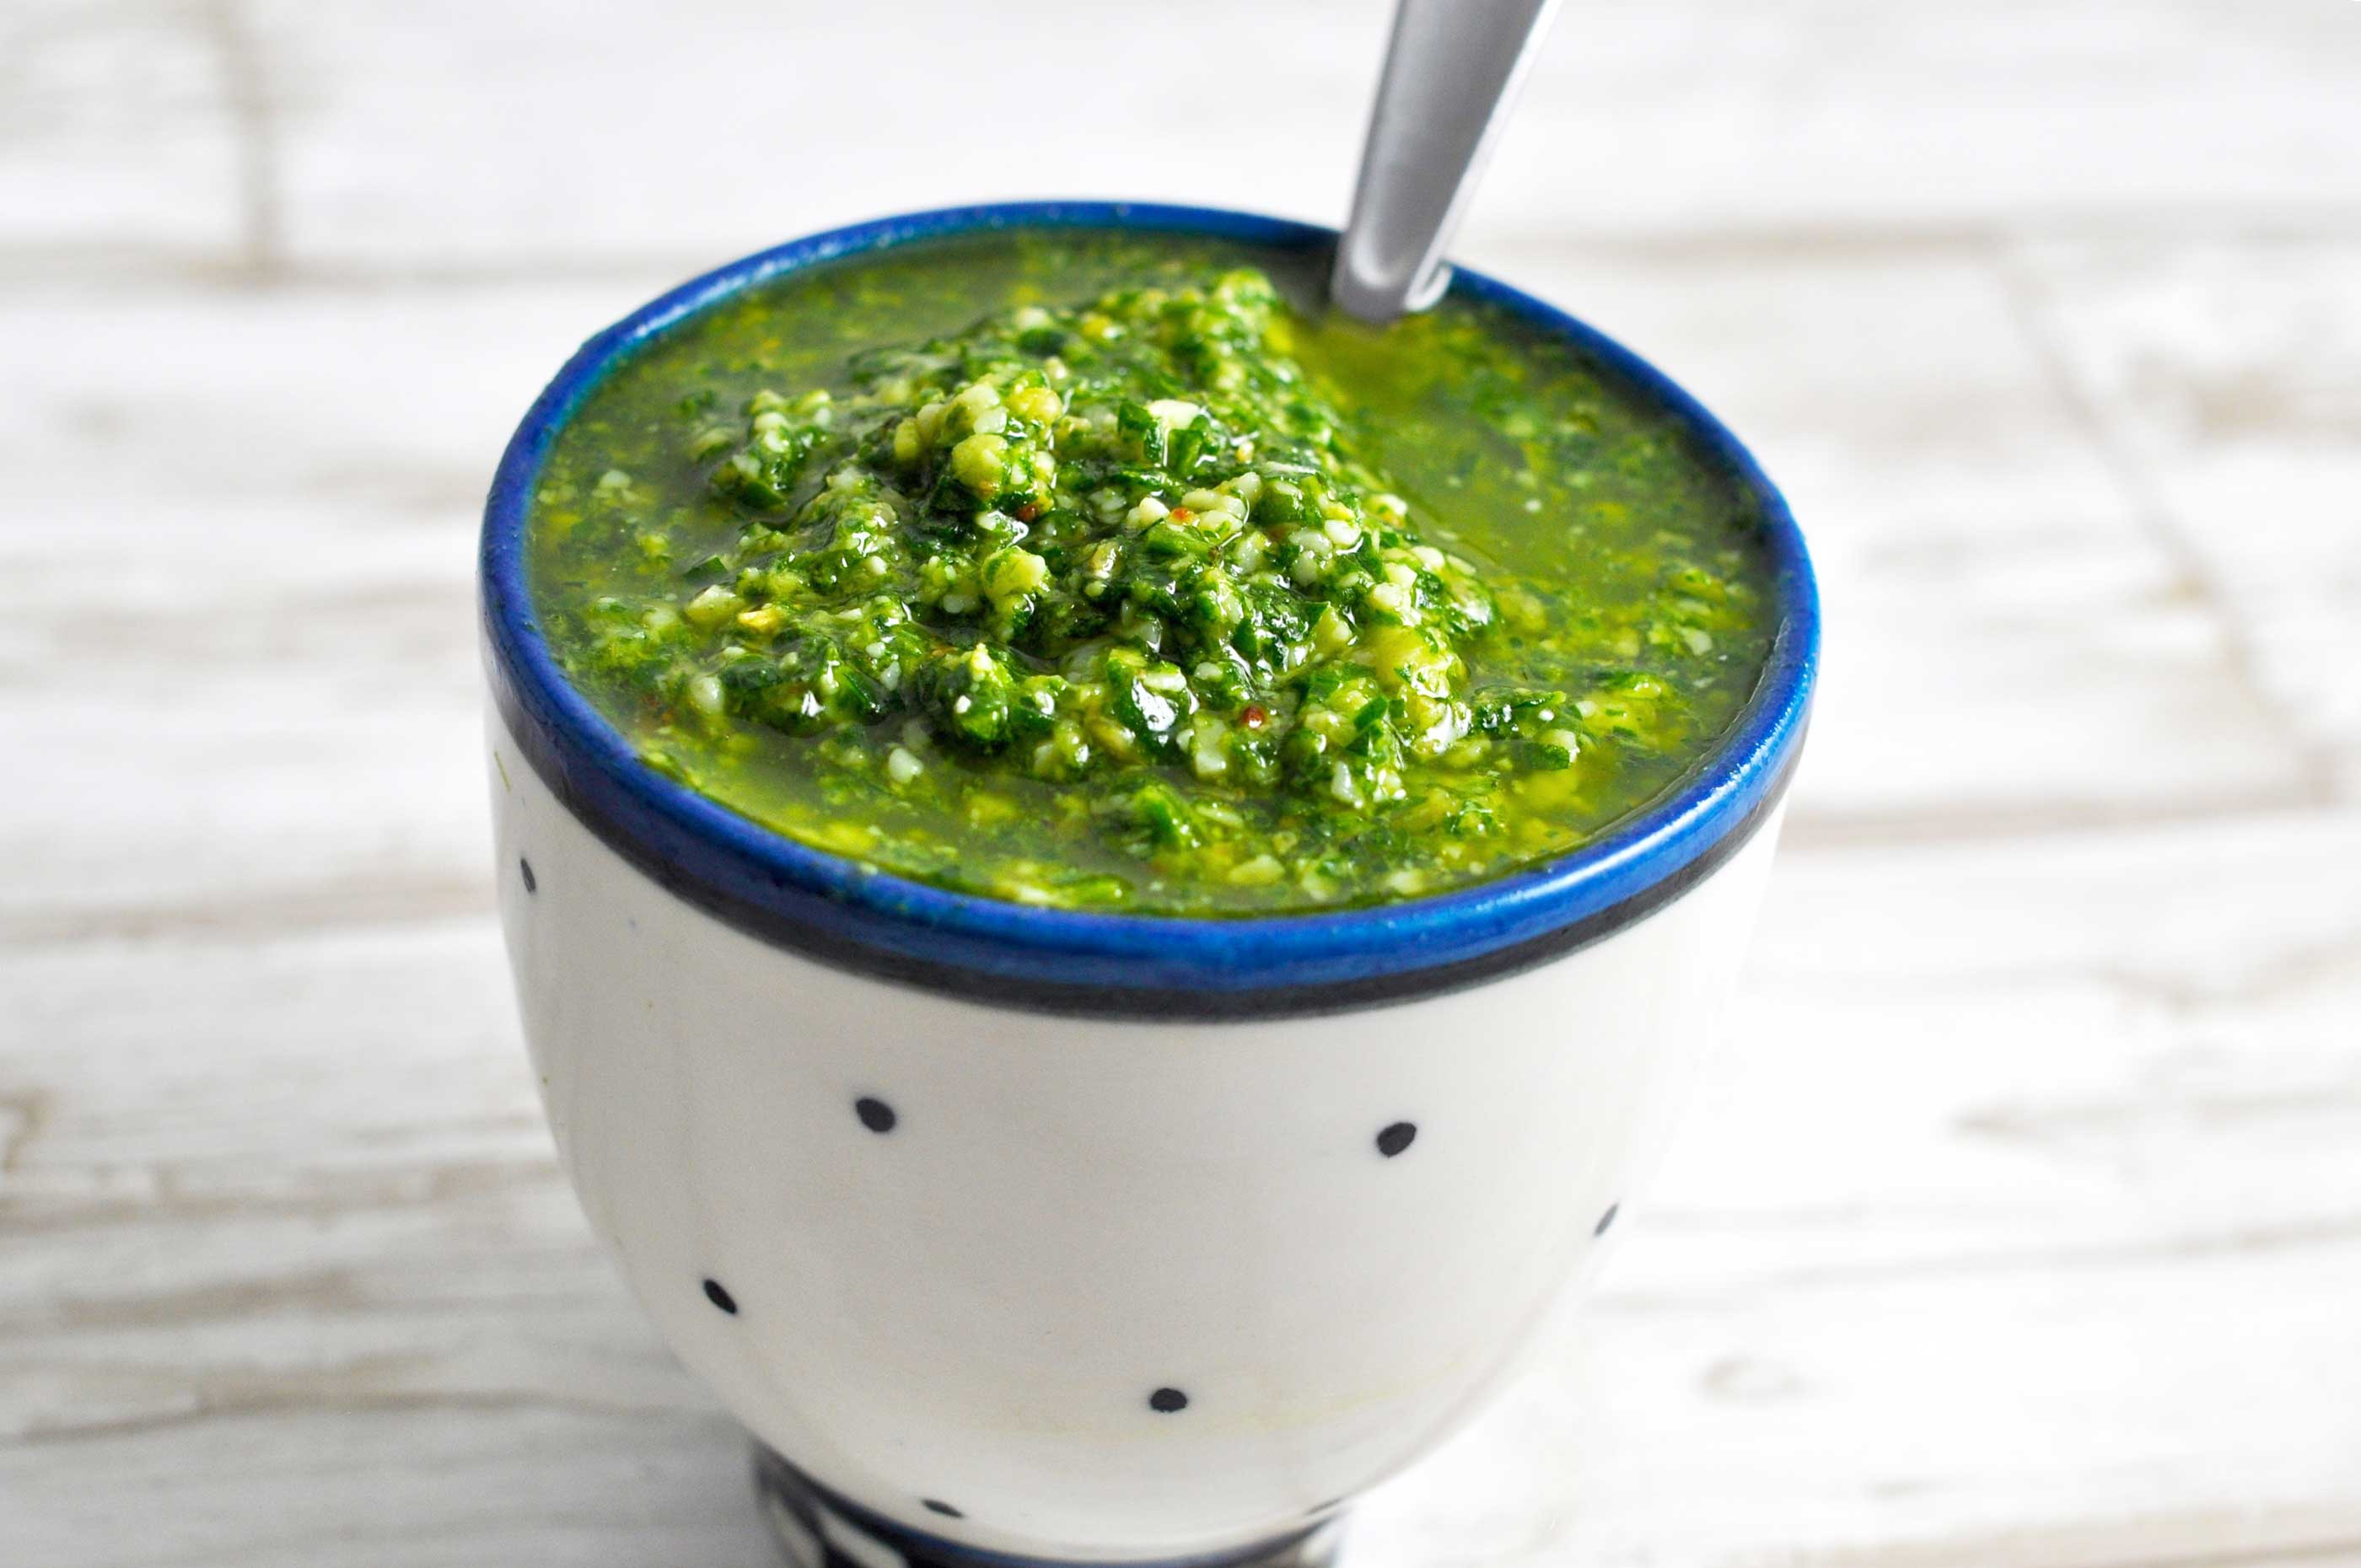 Tasty and quick pesto with rocket - done in 5 minutes